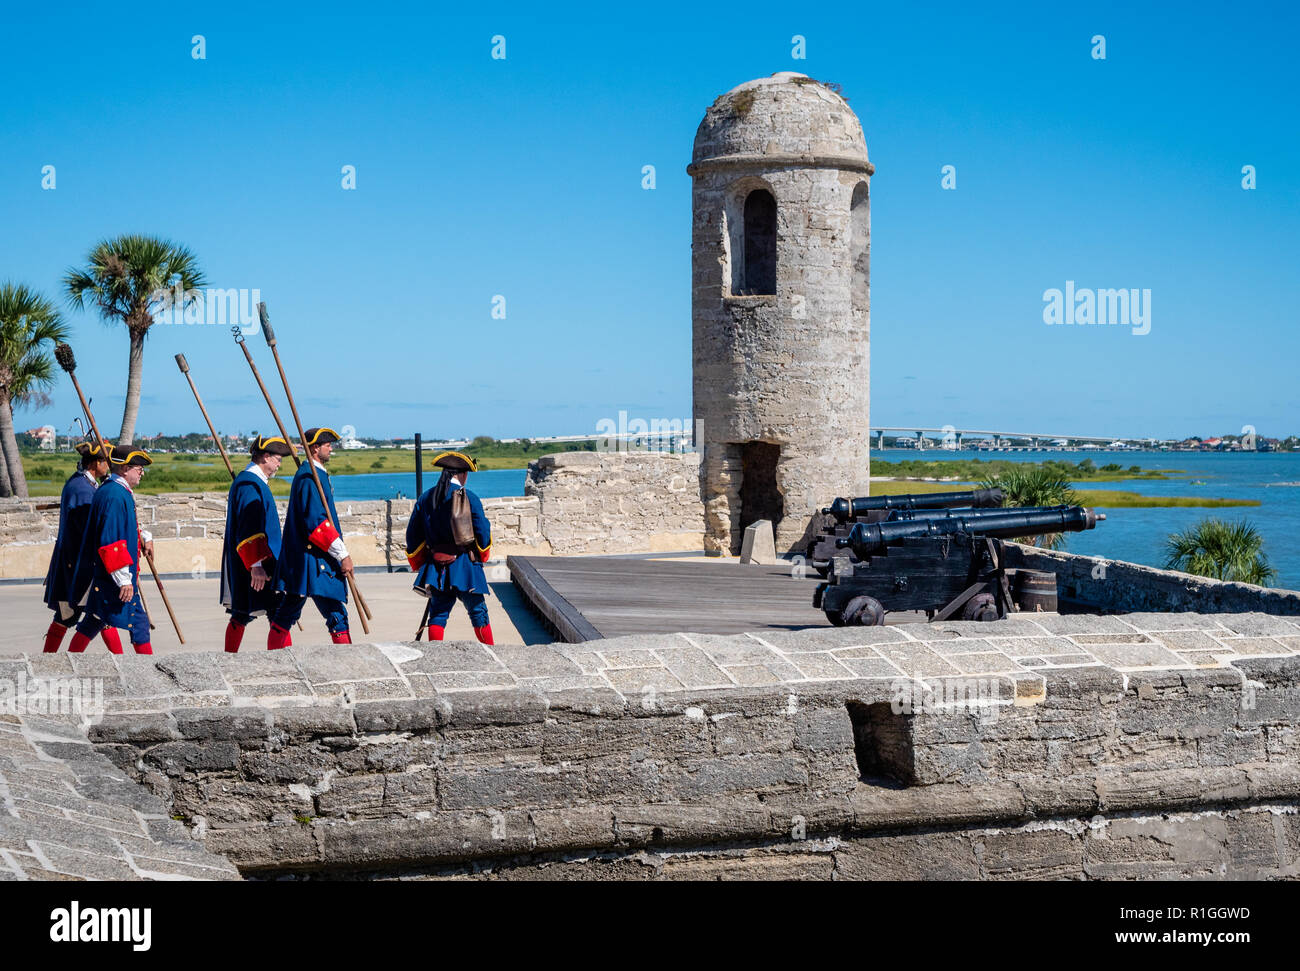 Men in eighteenth century Spanish military costume at Castillo de San Marcos in St Augustine Florida USA firing a cannon on the battlements Stock Photo